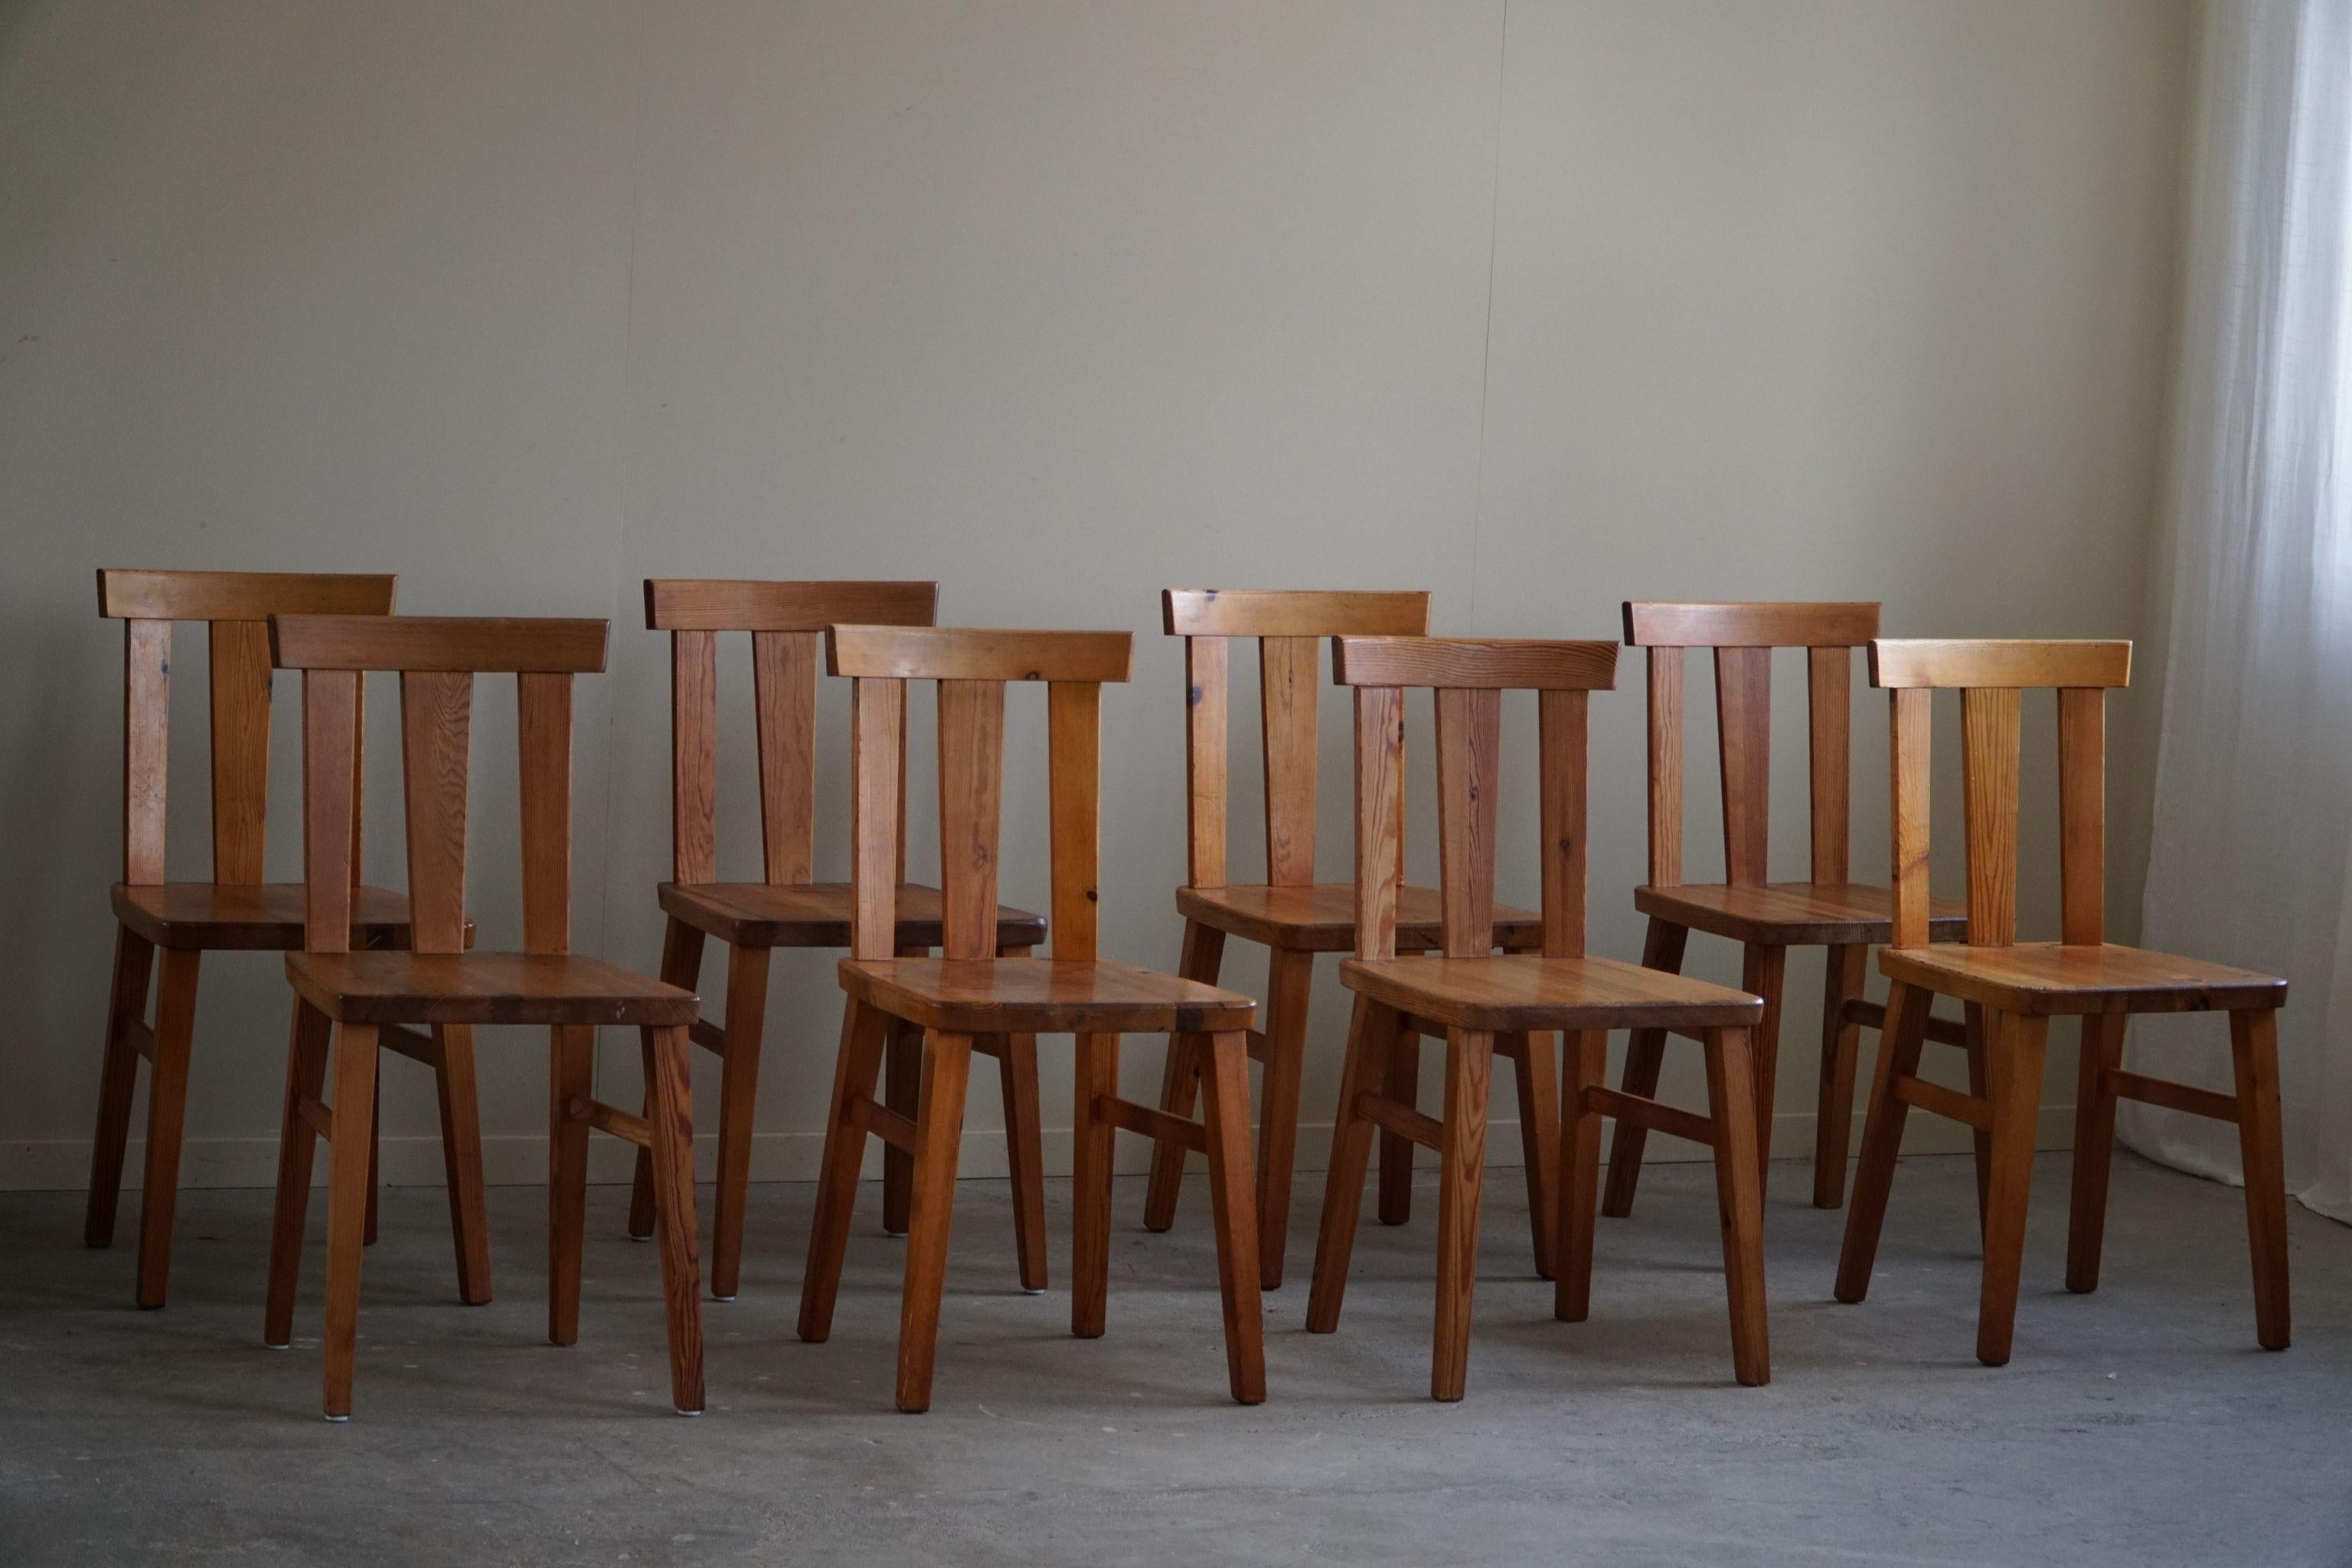 Swedish Modern, Set of 8 Chairs in Solid Pine, Axel Einar Hjorth Style, 1950s For Sale 7